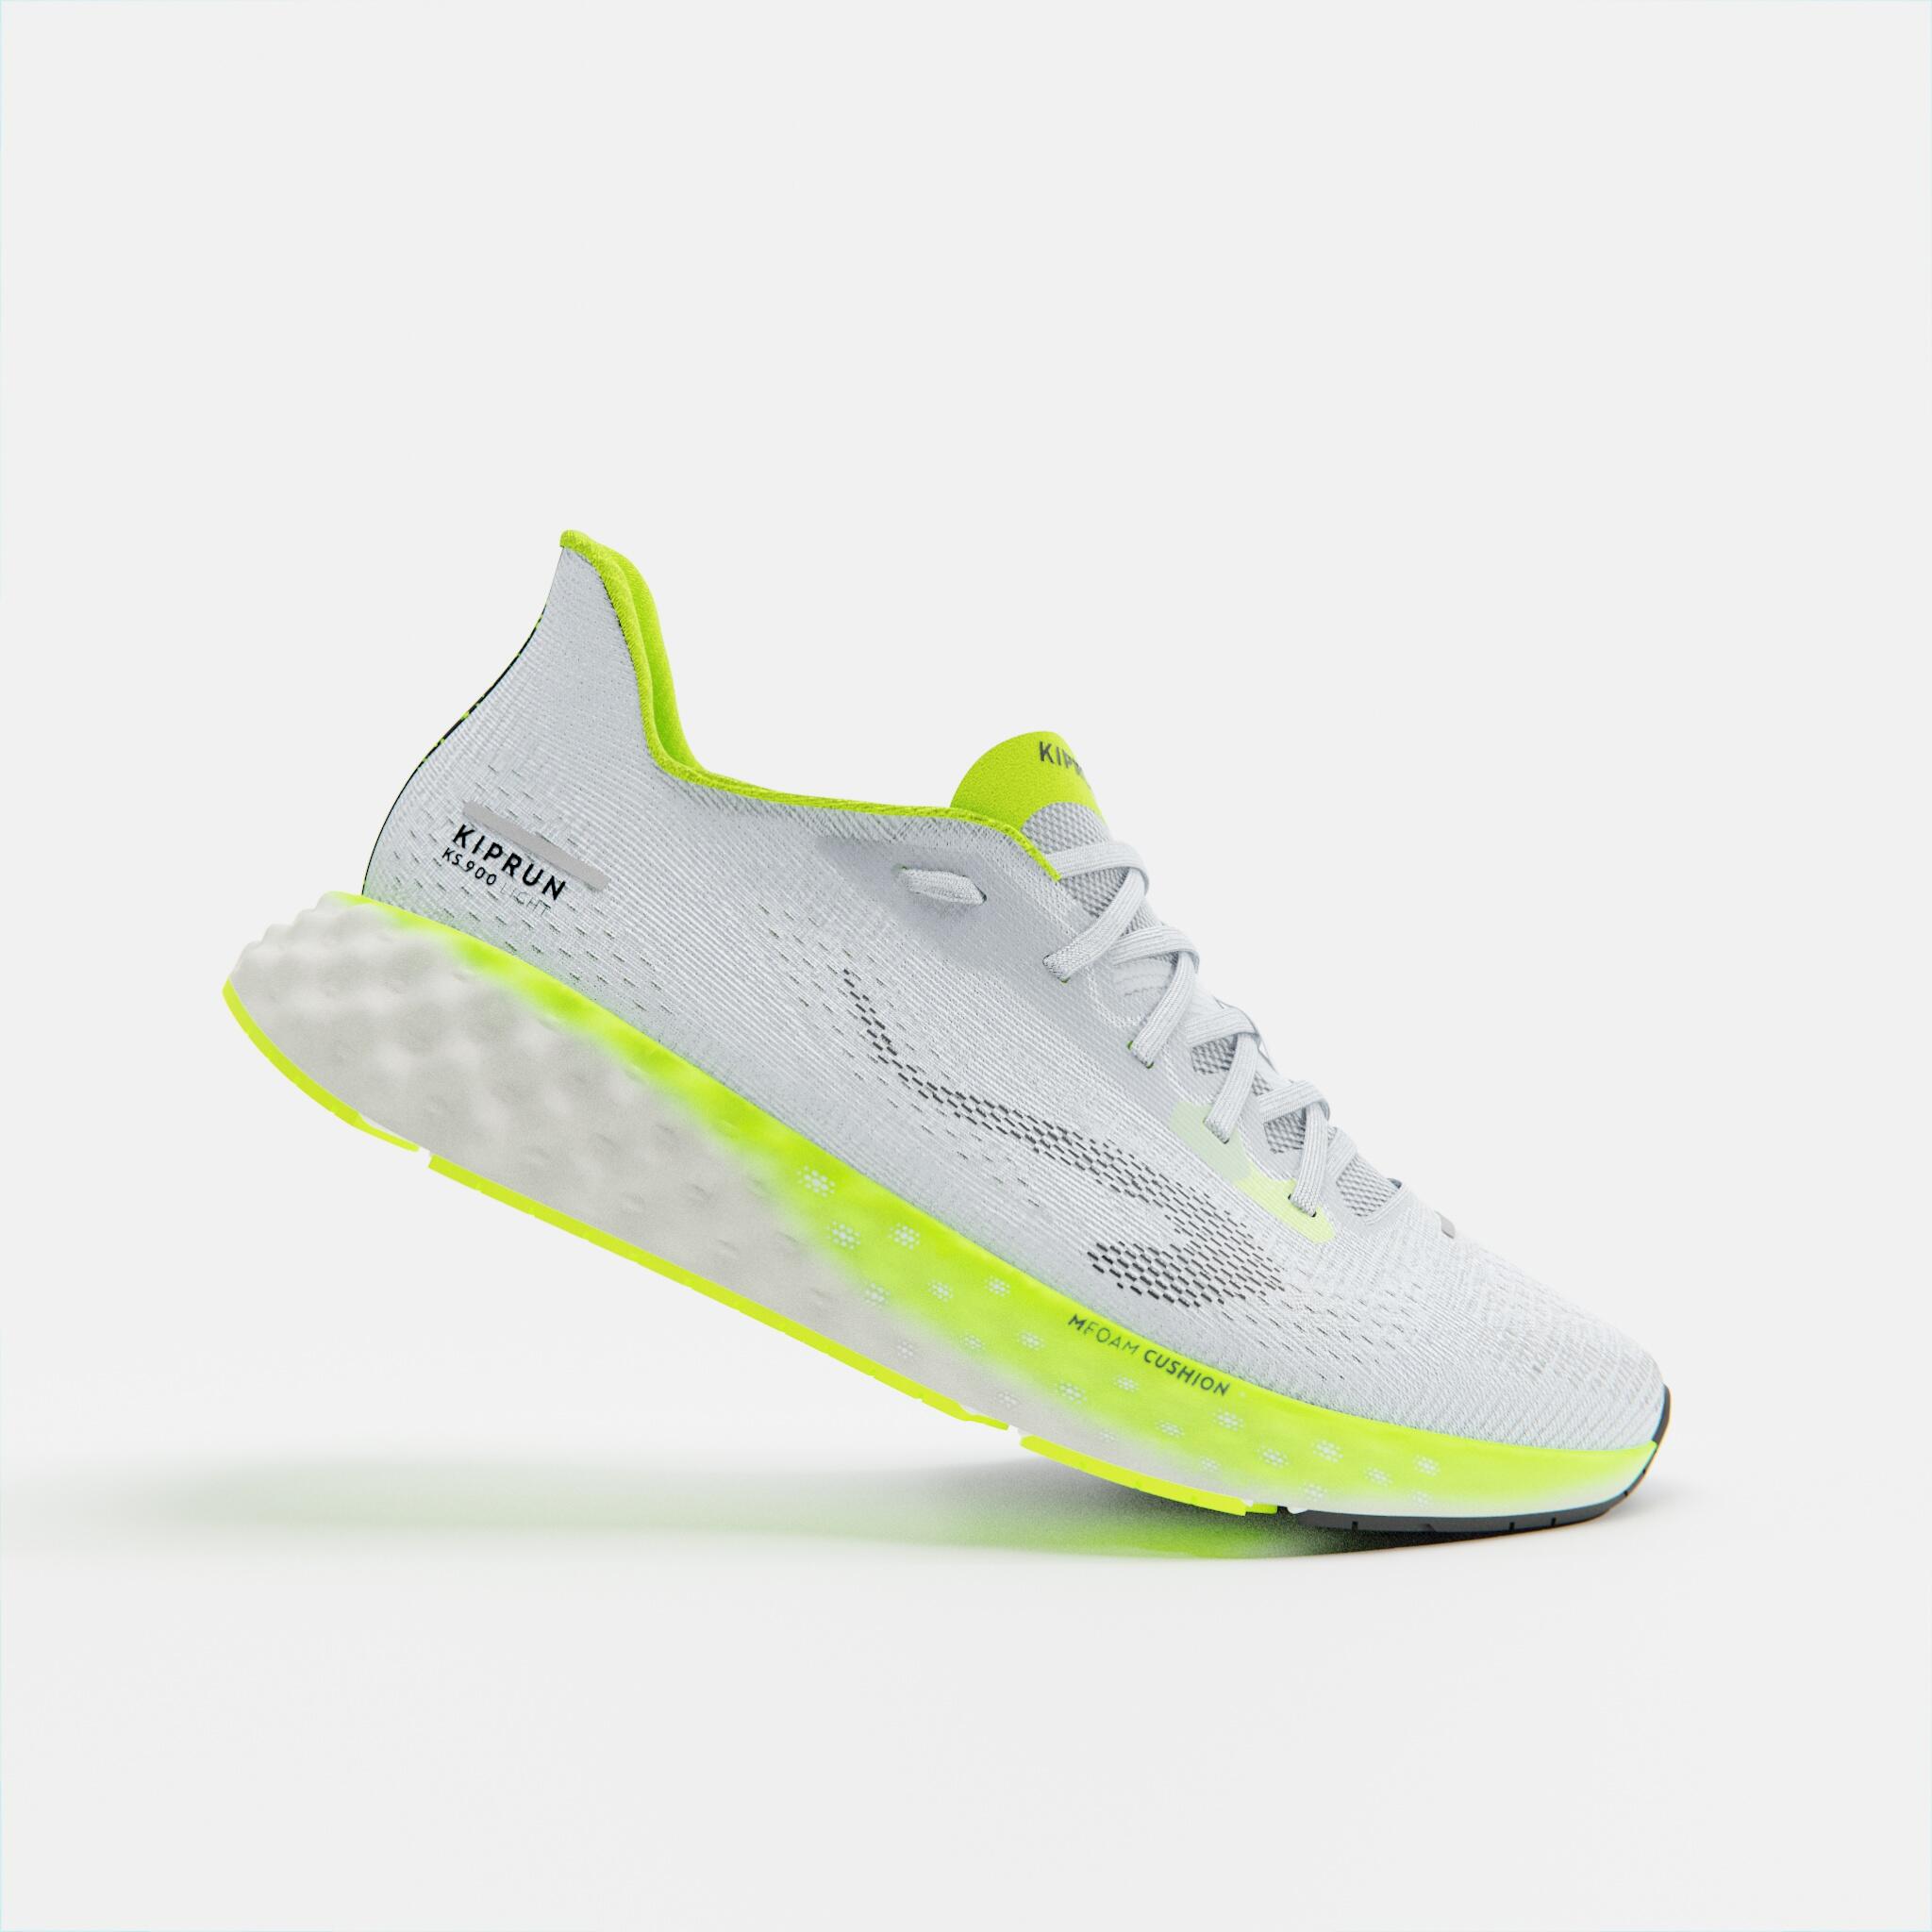 foggy blue / fluo lime yellow